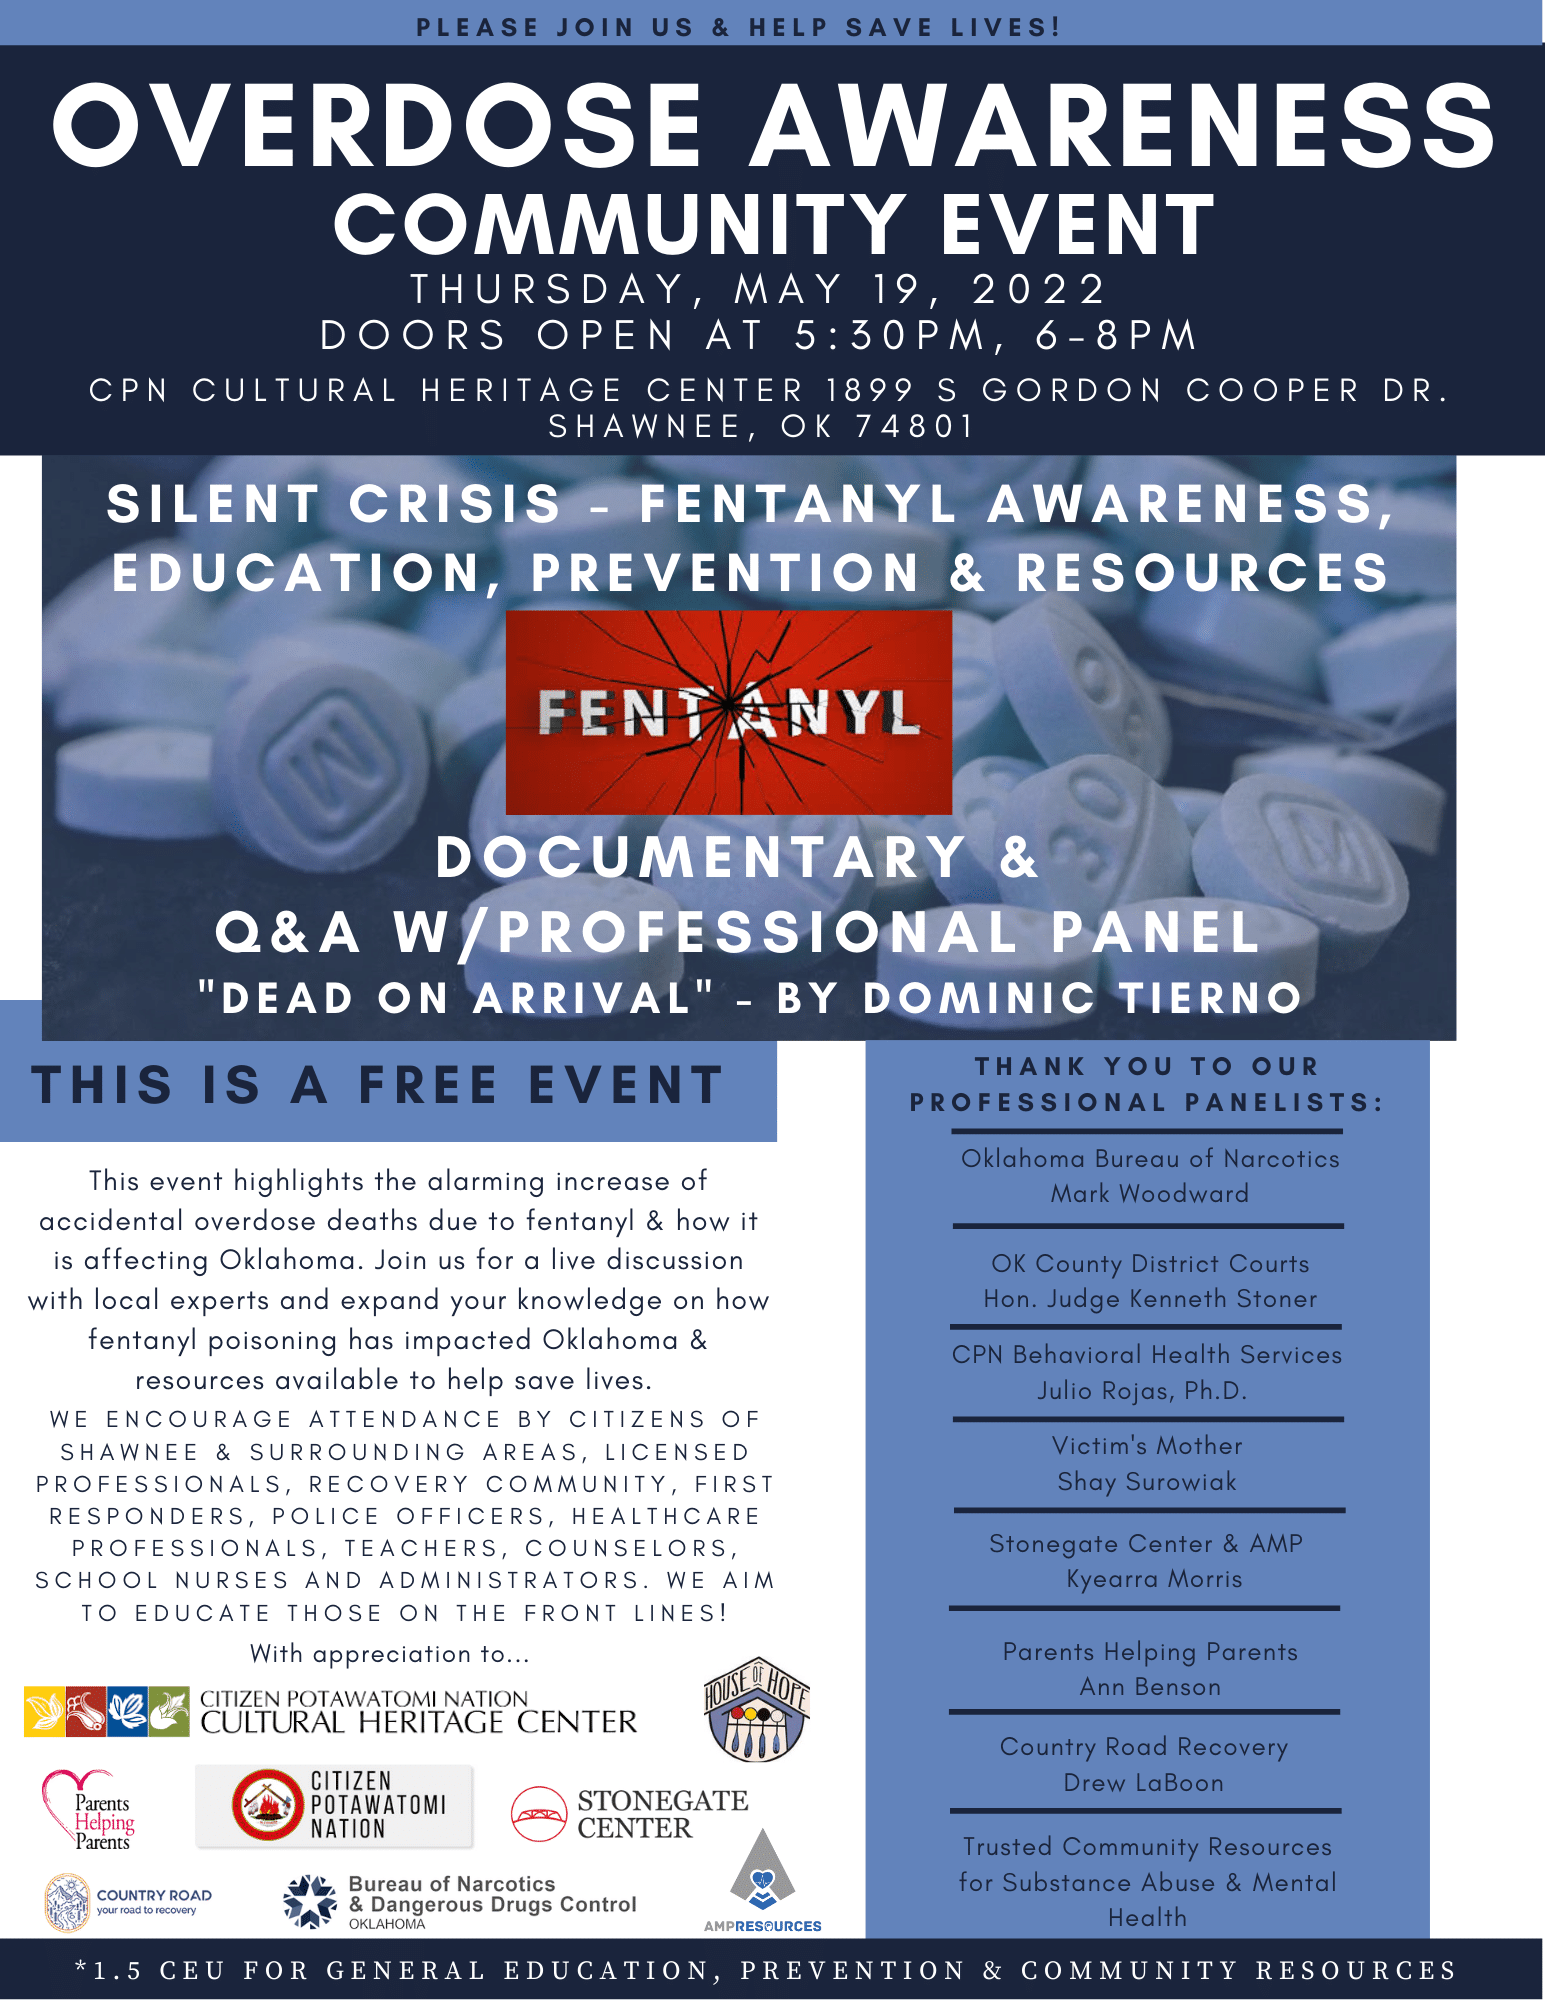 Flyer in shades of blue advertising the upcoming community awareness event about accidental fentanyl overdose deaths in Oklahoma and resources available to those on the front lines.